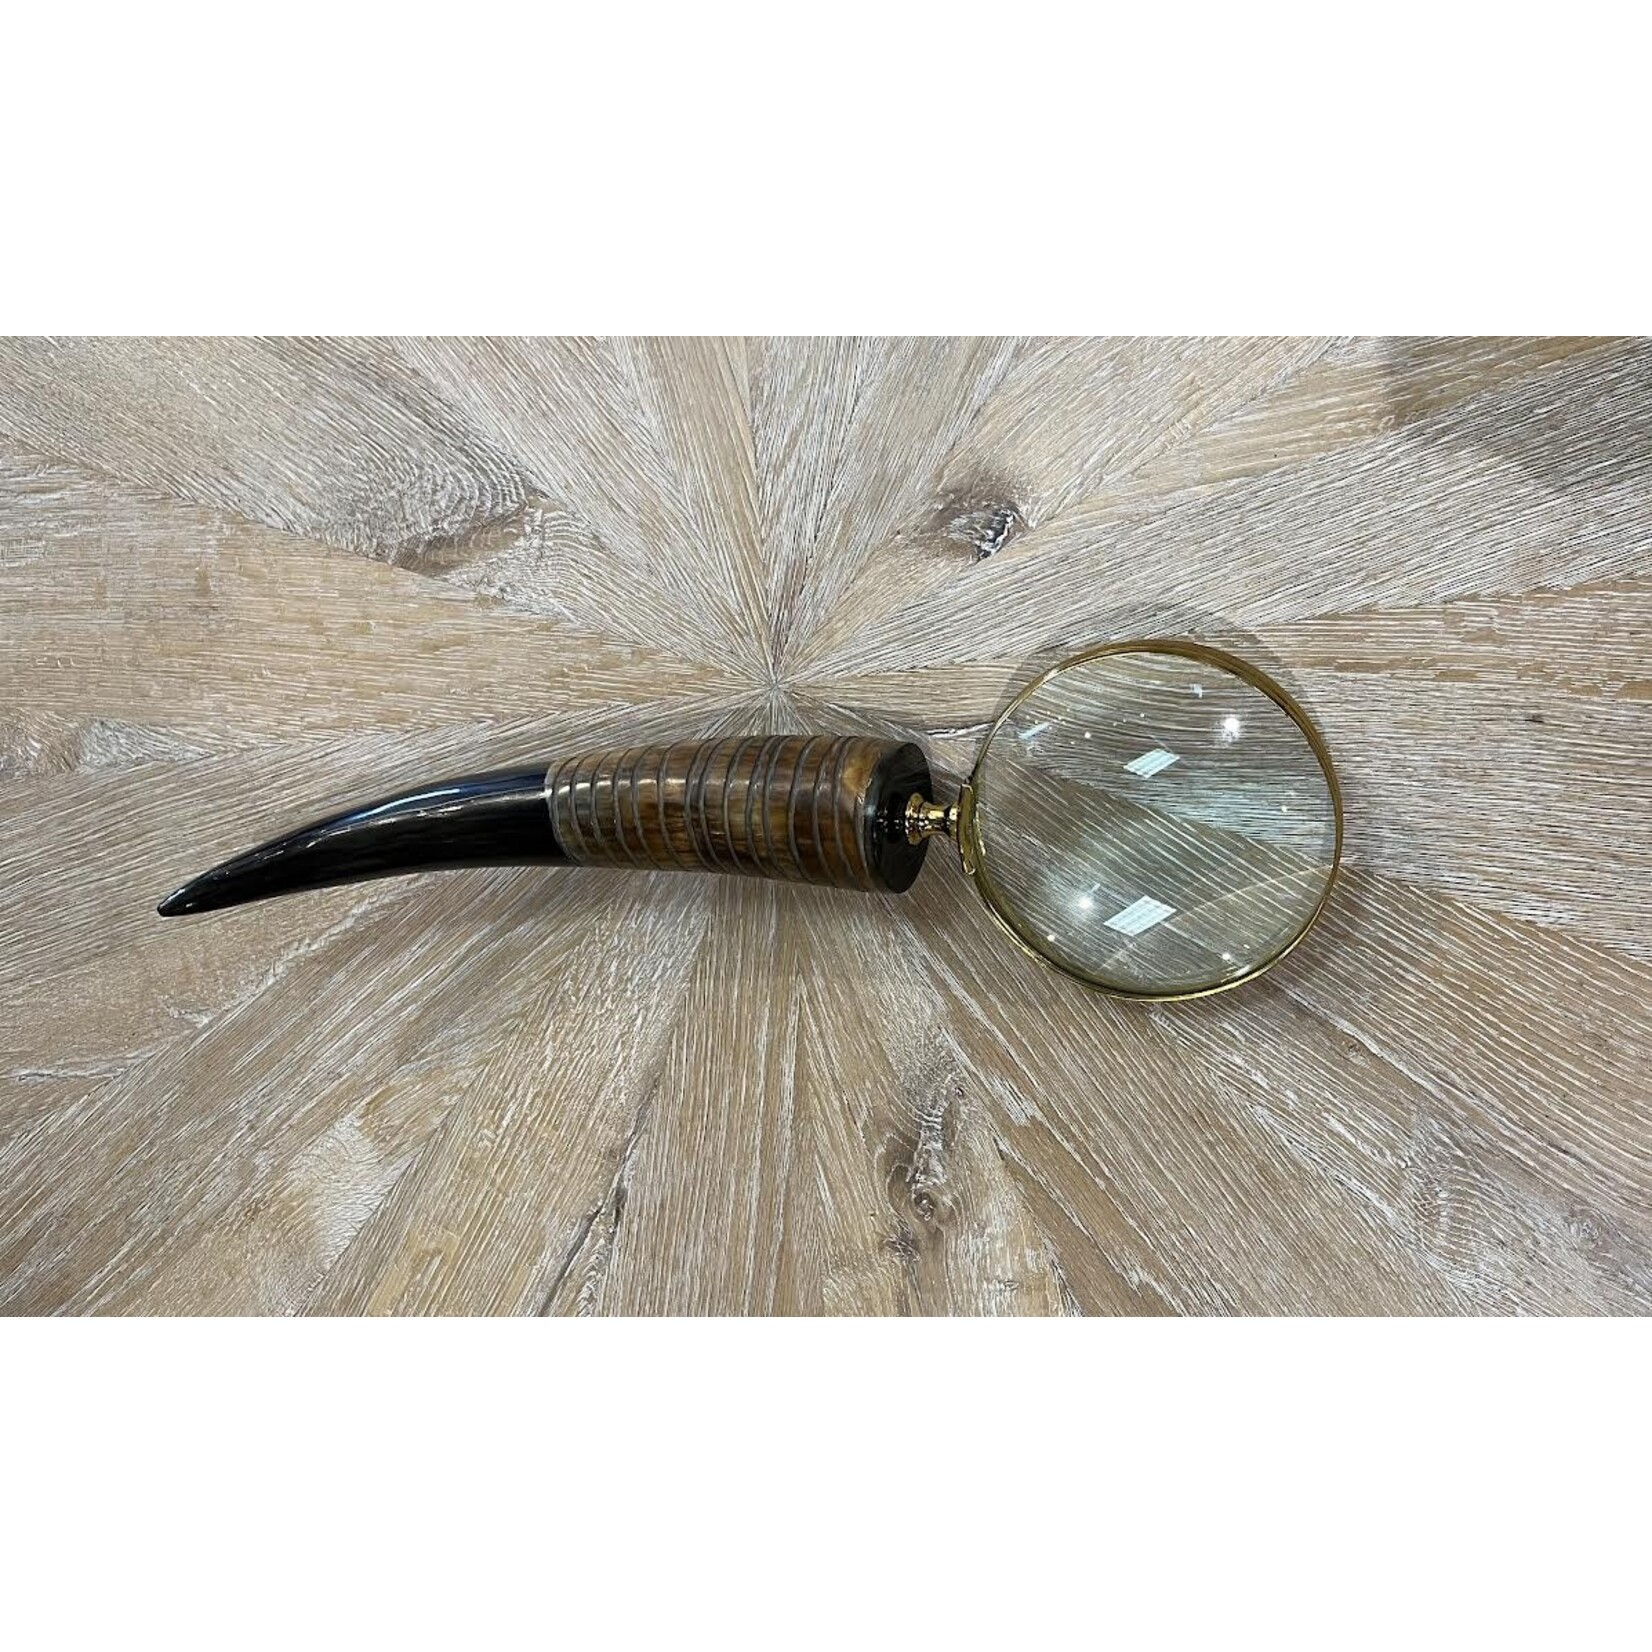 Frances Stoia Assoc Variegated Horn Magnifing Glass with Half Burnished Carved Handle